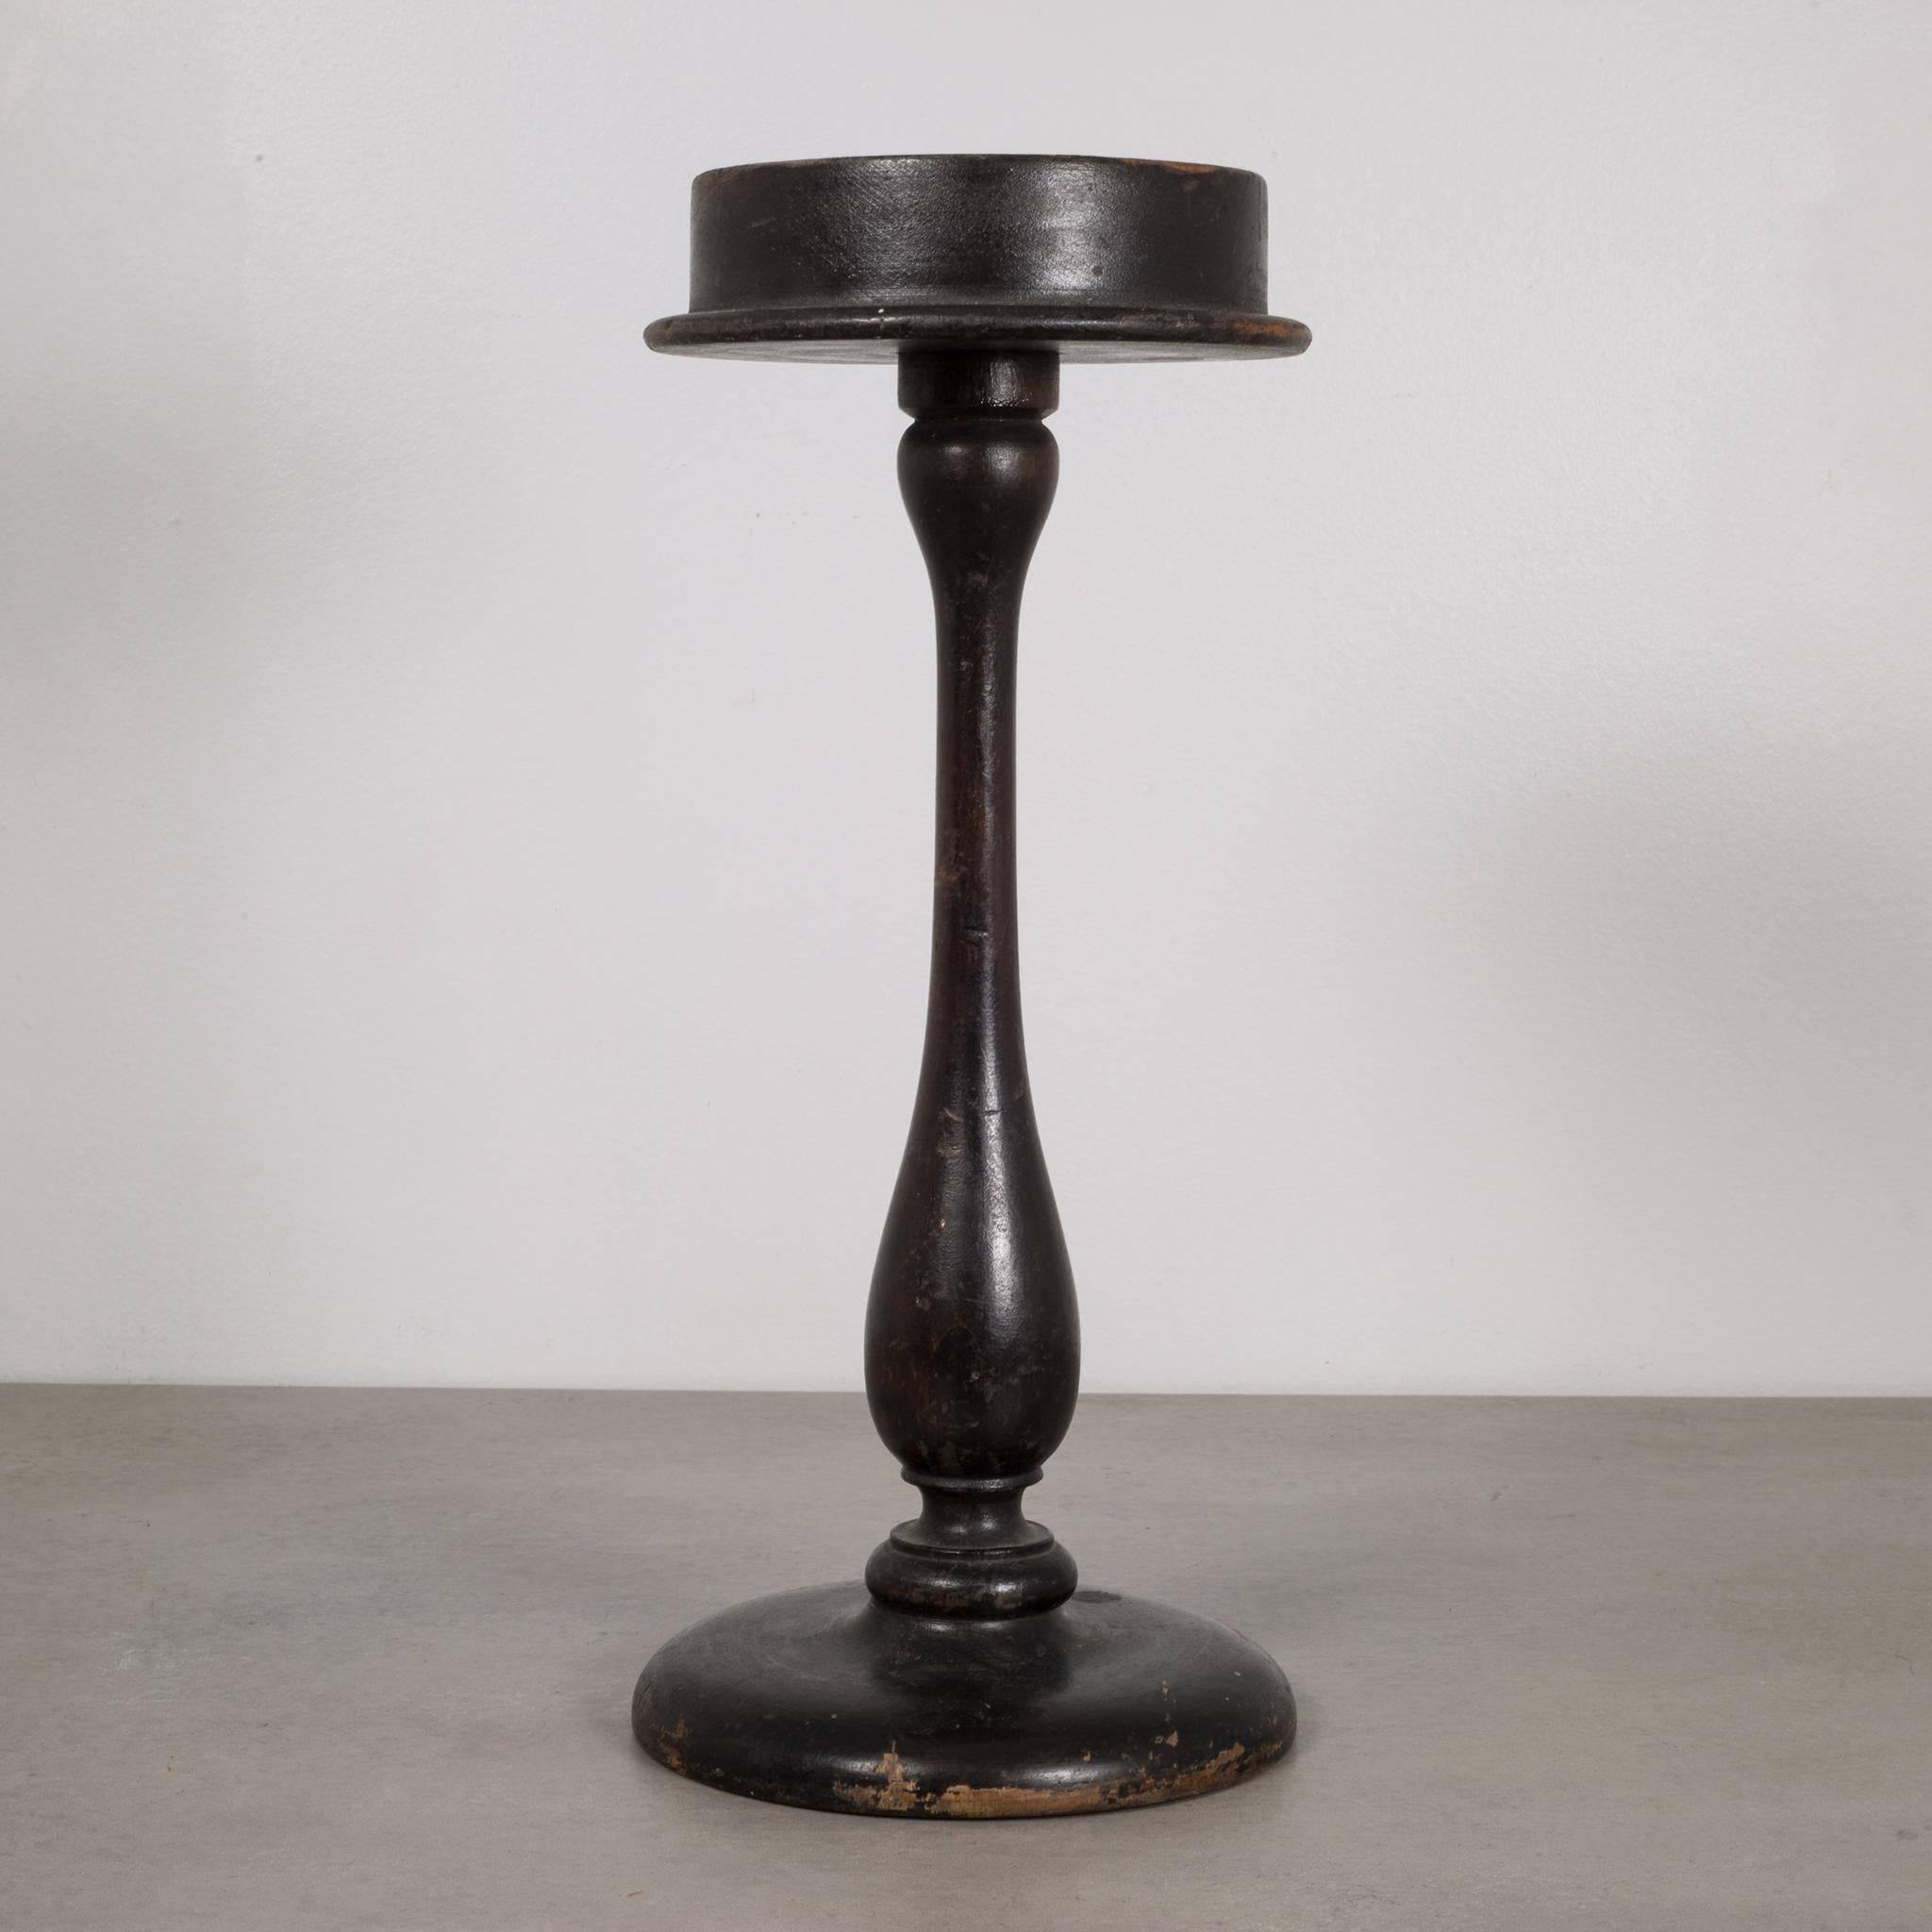 Turned Late 19th-Early 20th Century Antique Wooden Hat Display Stand